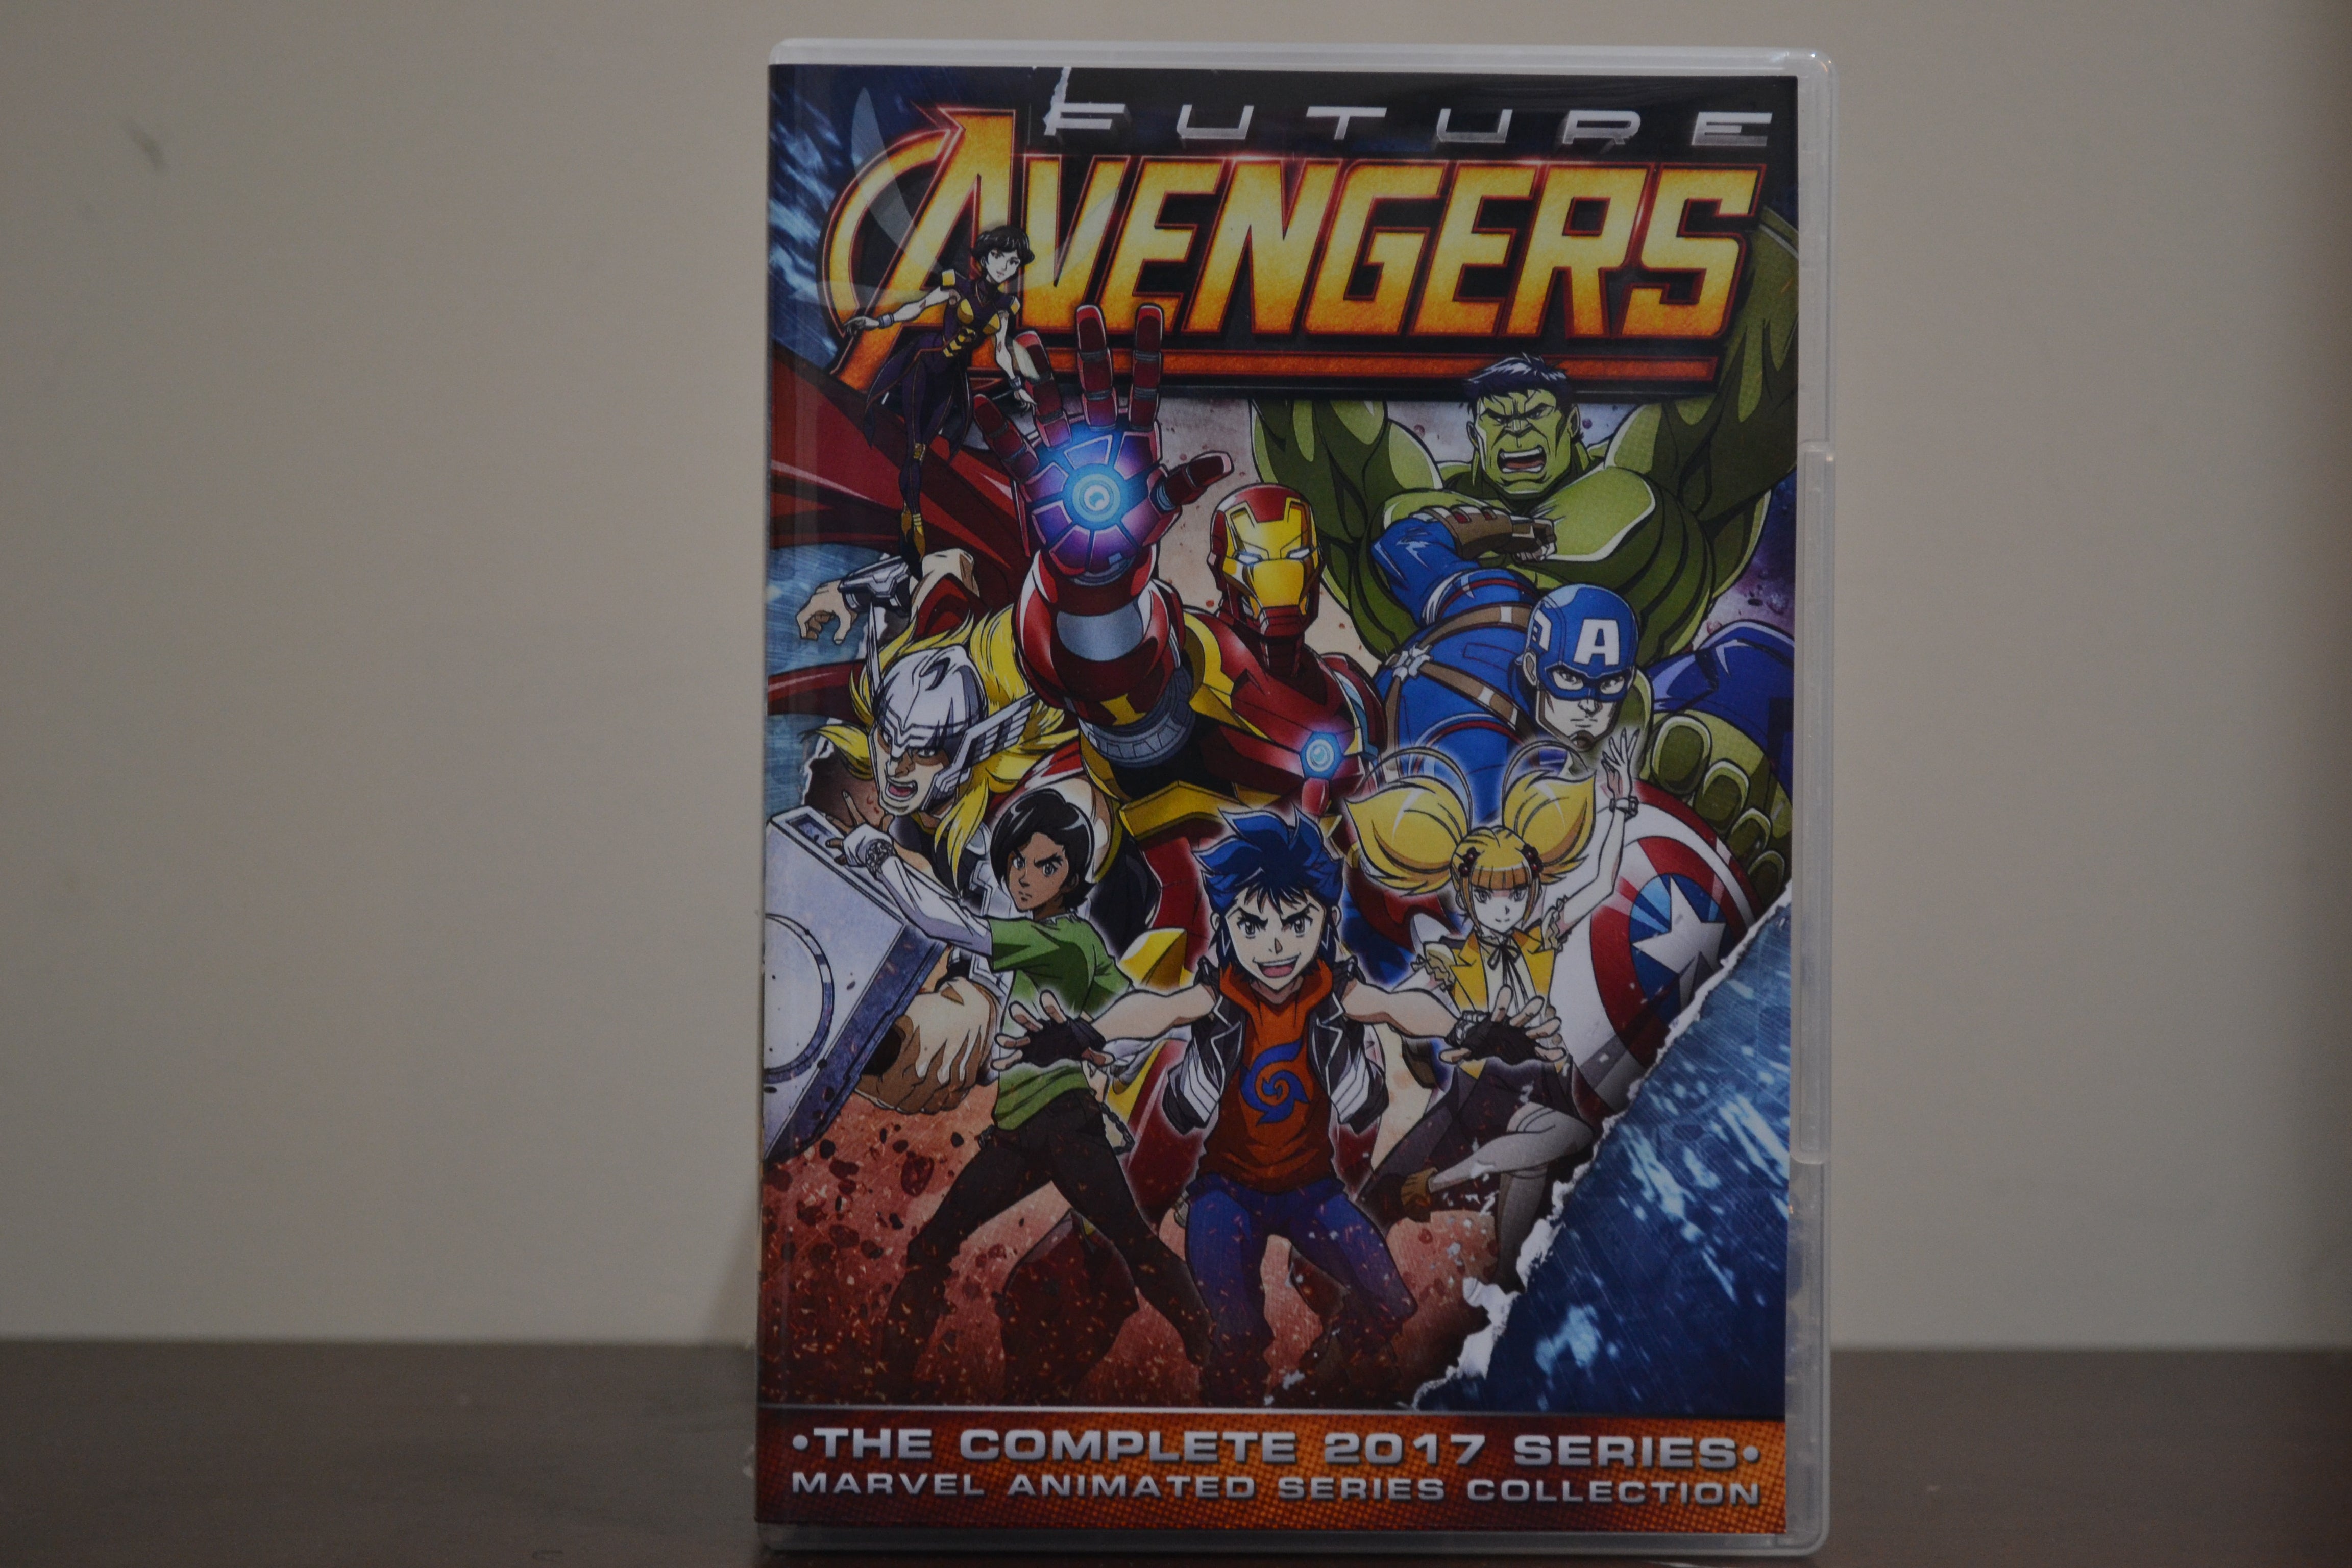 Future Avengers The Complete Series DvD Set